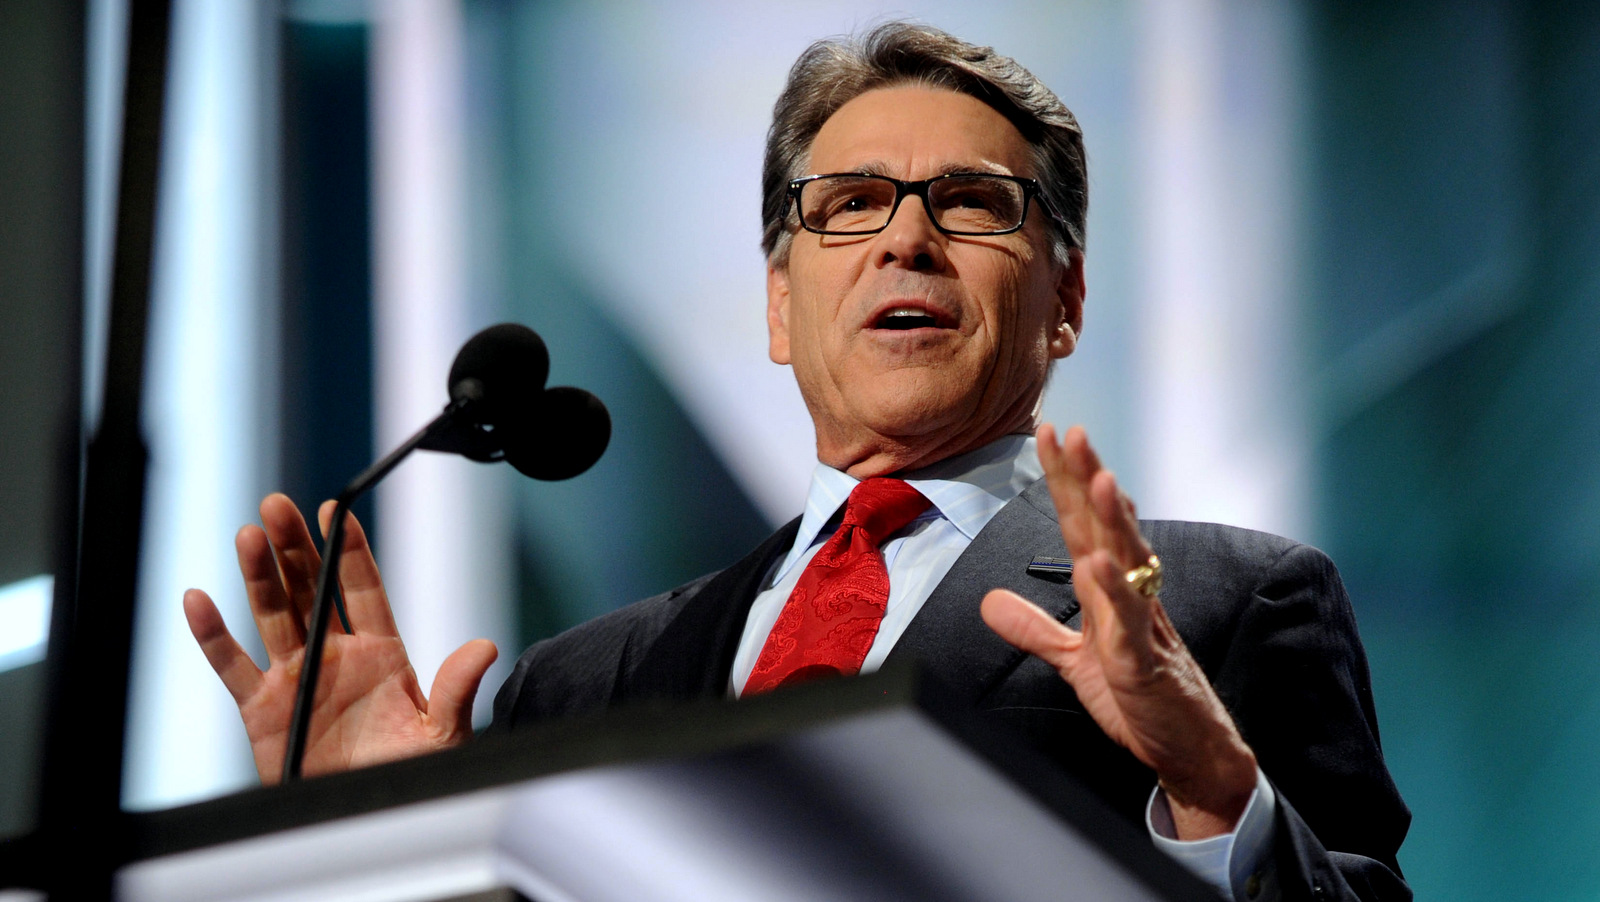 Rick Perry at the 2016 Republican National Convention. in Cleveland, Ohio. (Dennis Van Tine/STAR MAX/IPx/AP)